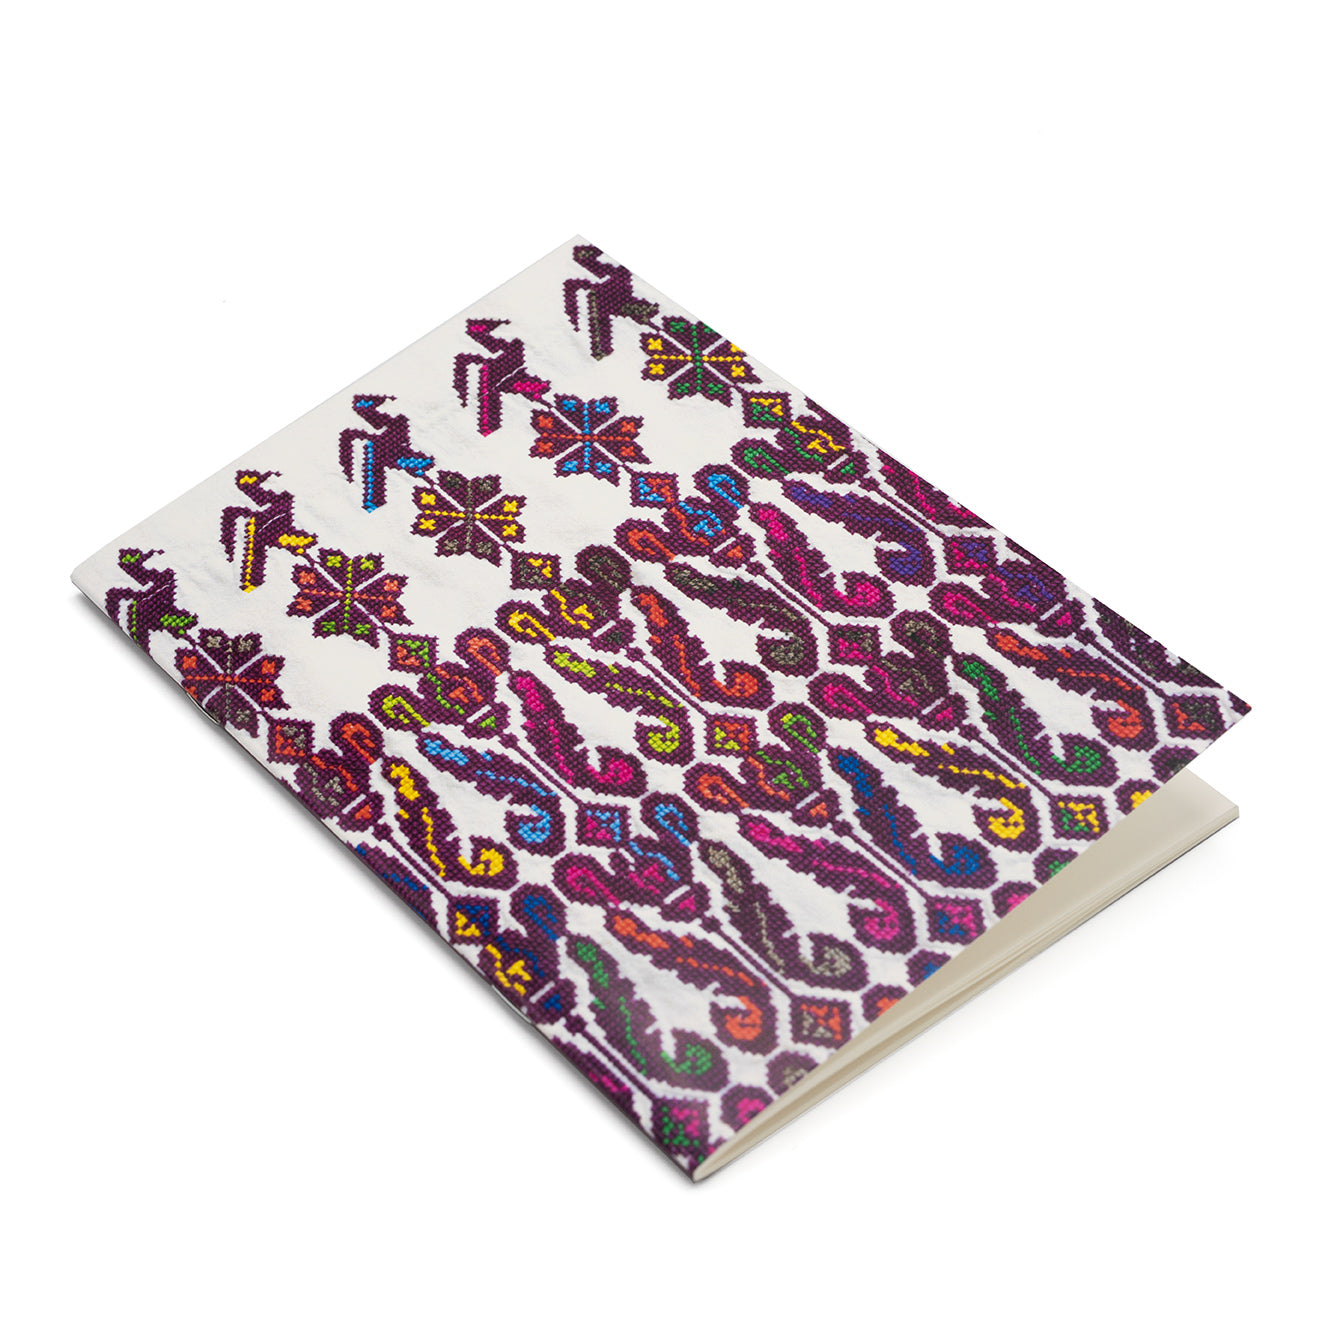 Notebook featuring a photographic detail of a purple, yellow and blue embroidered dress. The notebook is photographed against a white background.